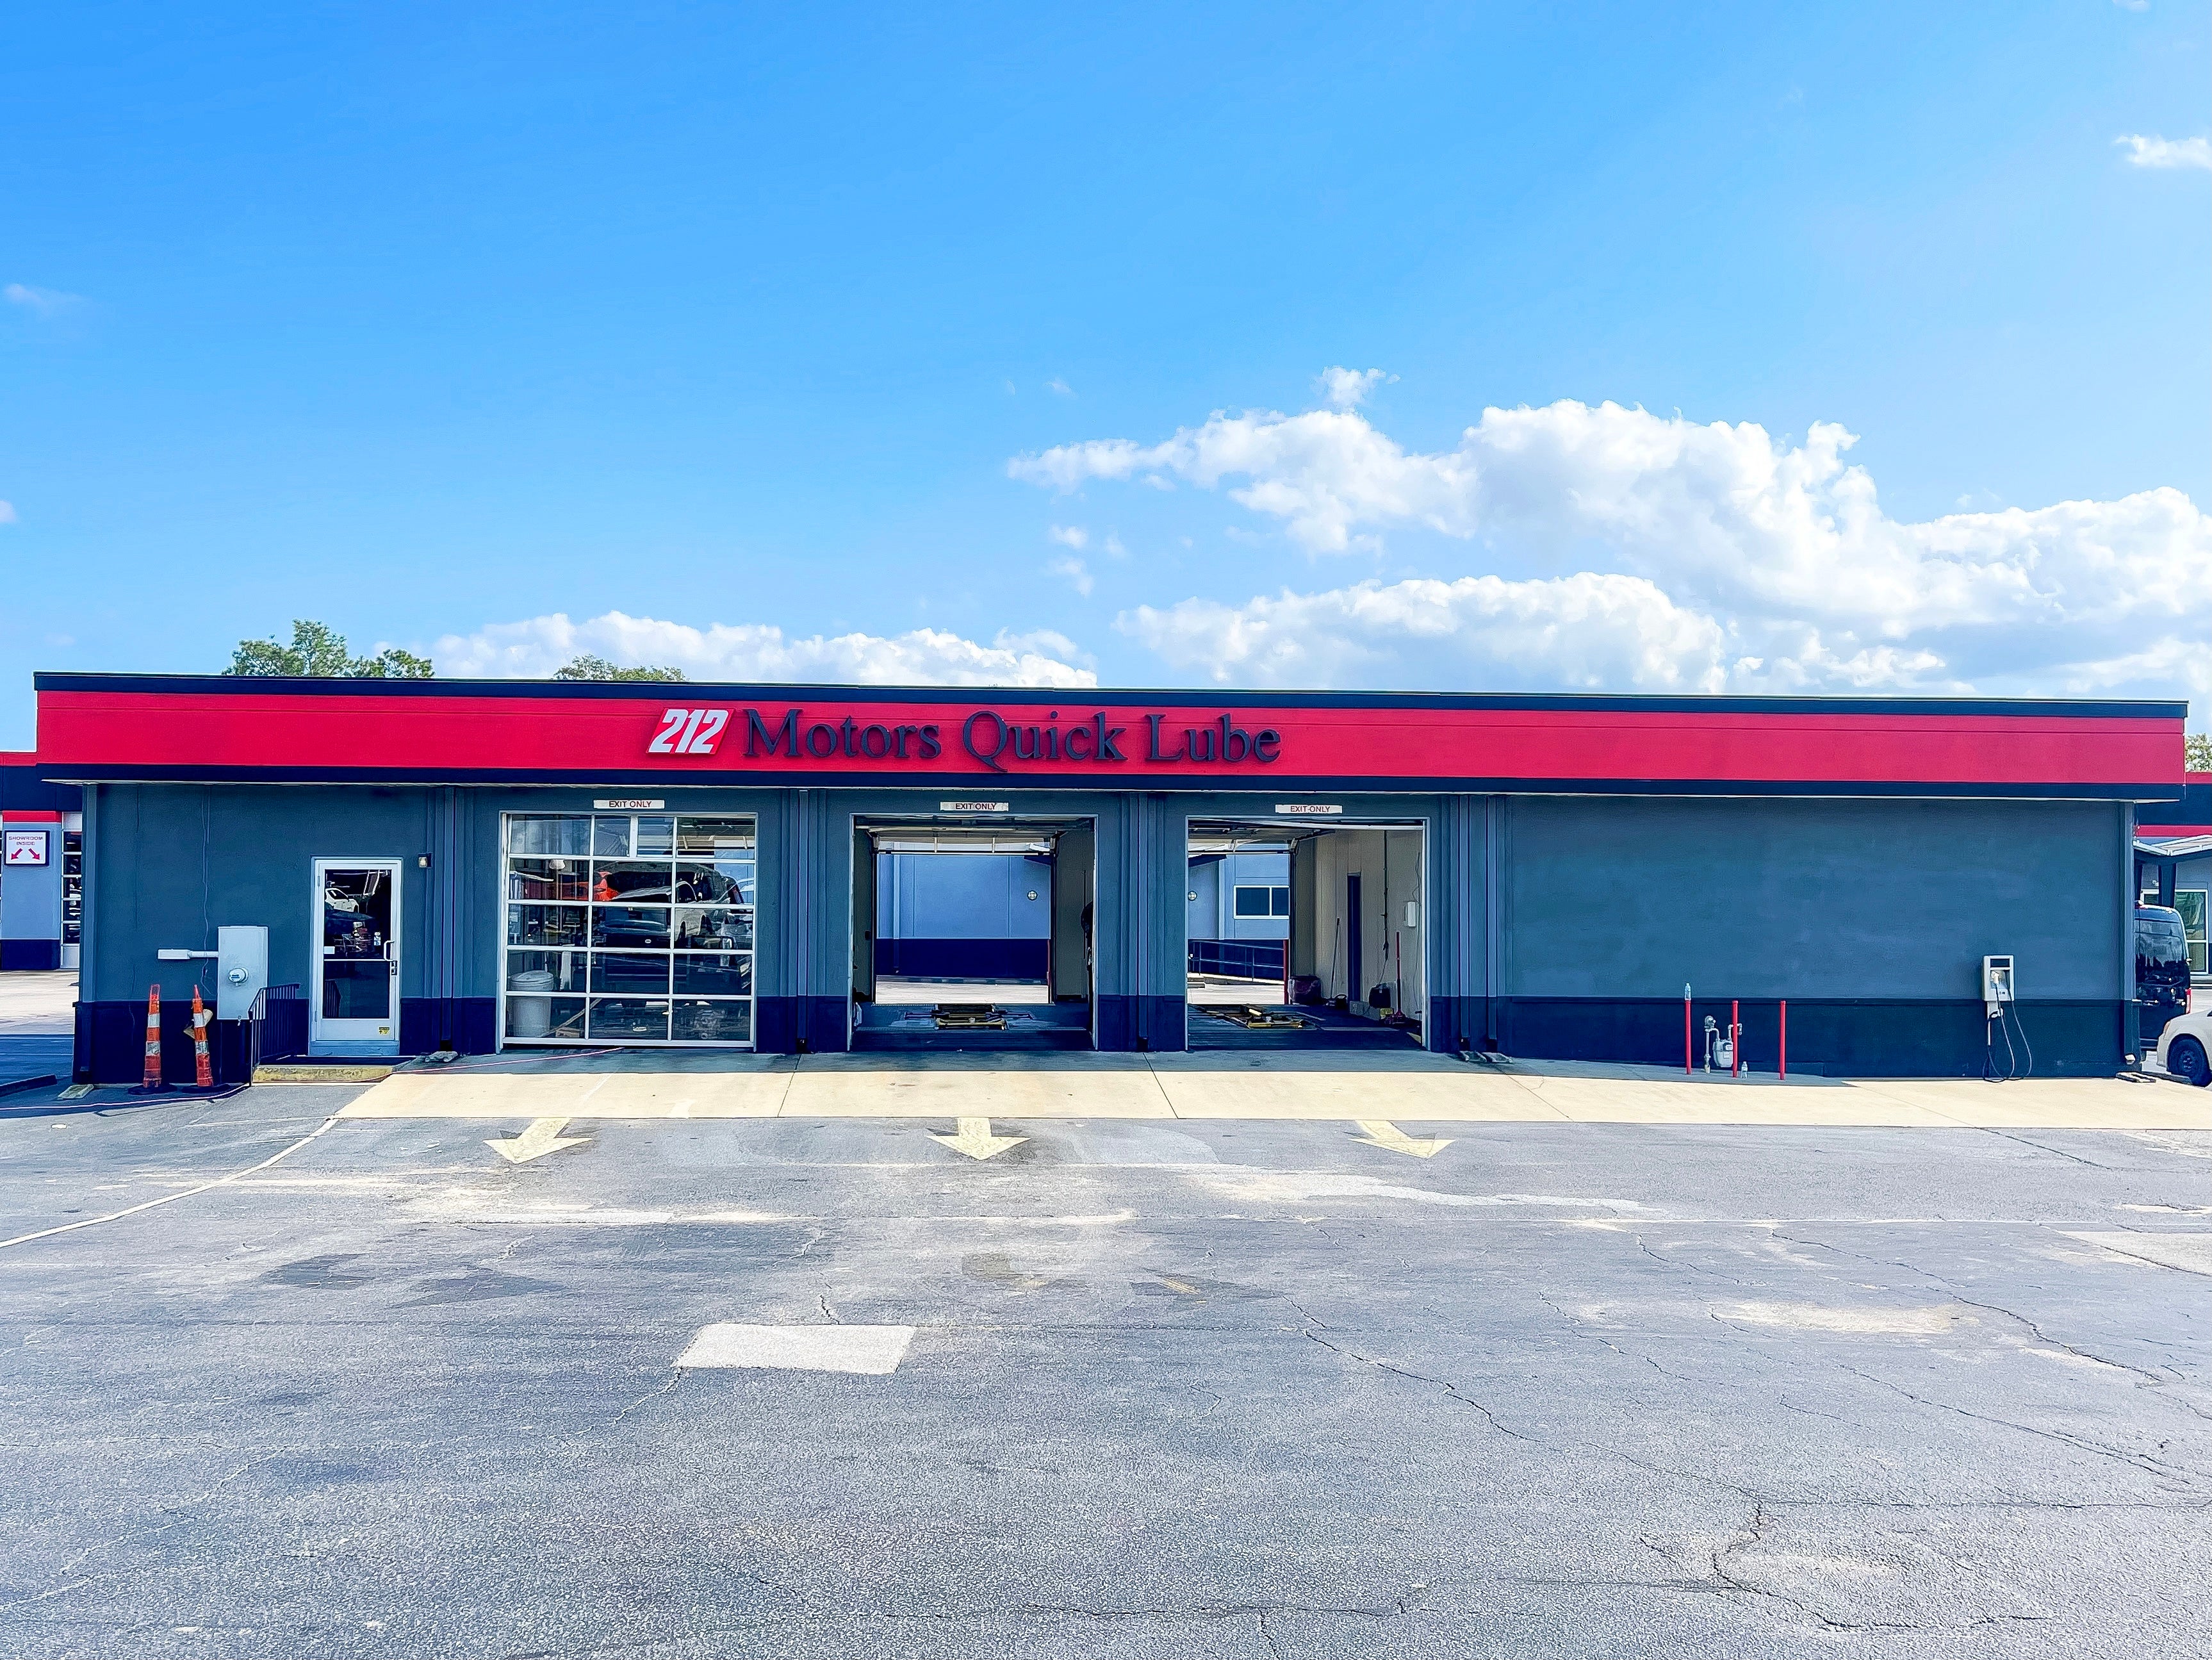 Service building at 212 Motors in Cayce SC